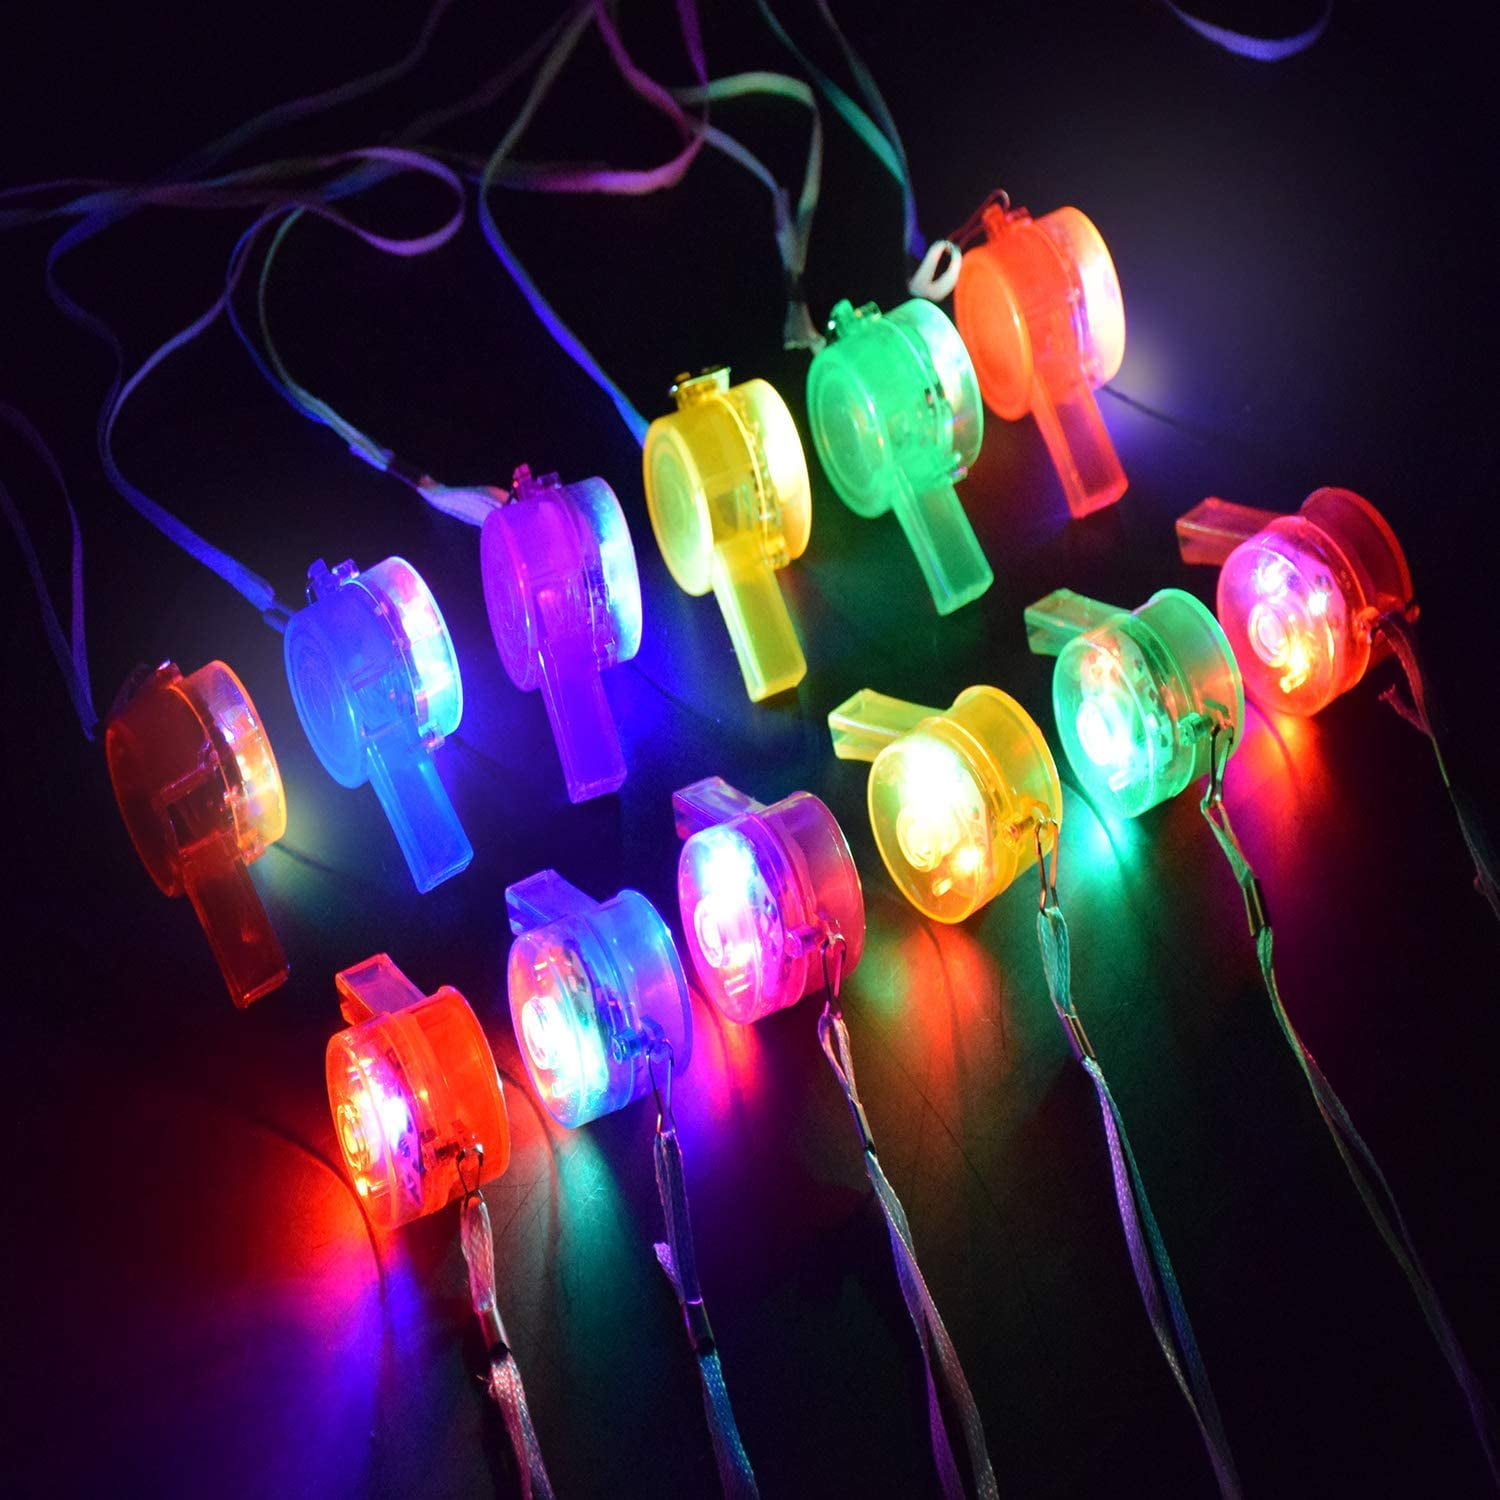 Newest Light Luminous Key Whistle Night Club Party Accessories Dolls Accessories 